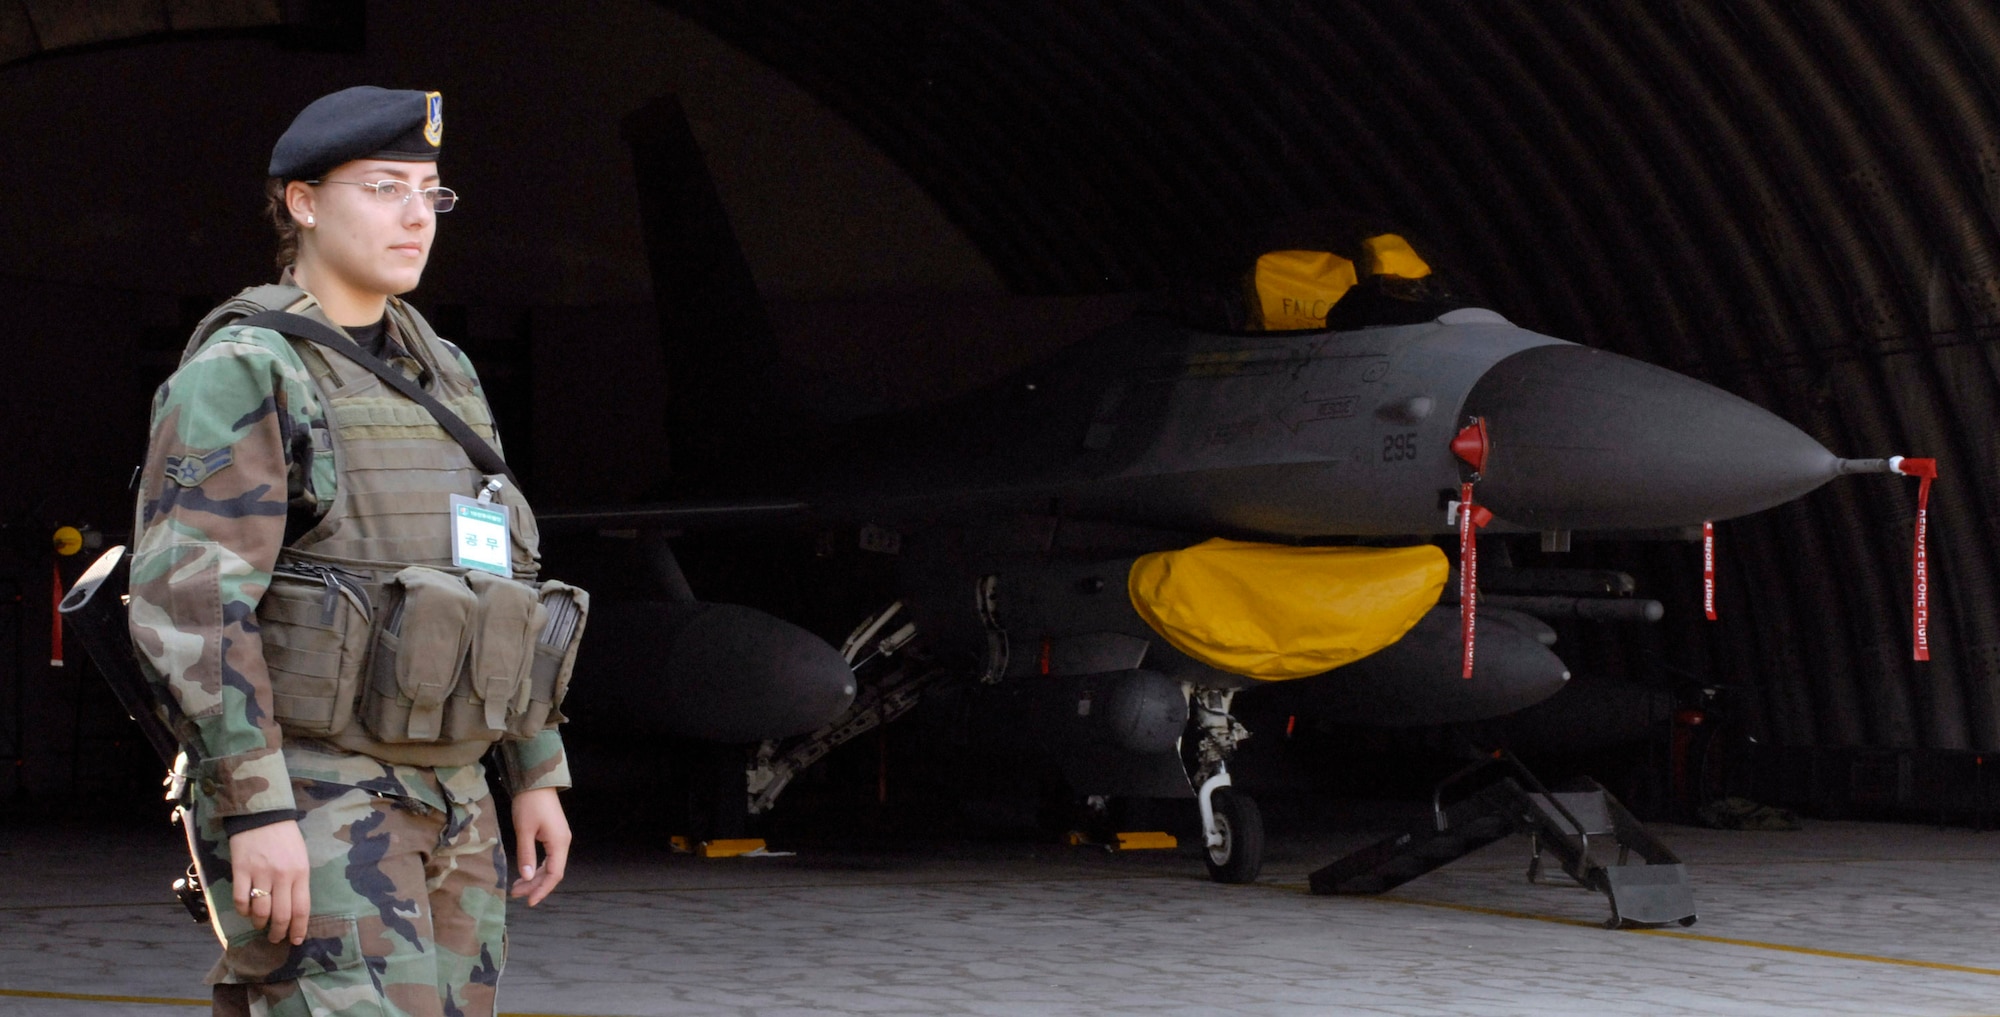 Airman 1st Class Ivelisse Gonzalez provides security for an F-16 Fighting Falcon Oct. 24 during the Buddy Wing program held at Jungwon Air Base, South Korea. Airman Gonzalez is assigned to the 8th Security Forces Squadron at Kunsan AB, South Korea. The Buddy Wing program is a way for U.S. Air Force and South Korea air force to develop teamwork, exchange ideas and improve war time tactics. (U.S. Air Force photo/Senior Airman Steven R. Doty) 